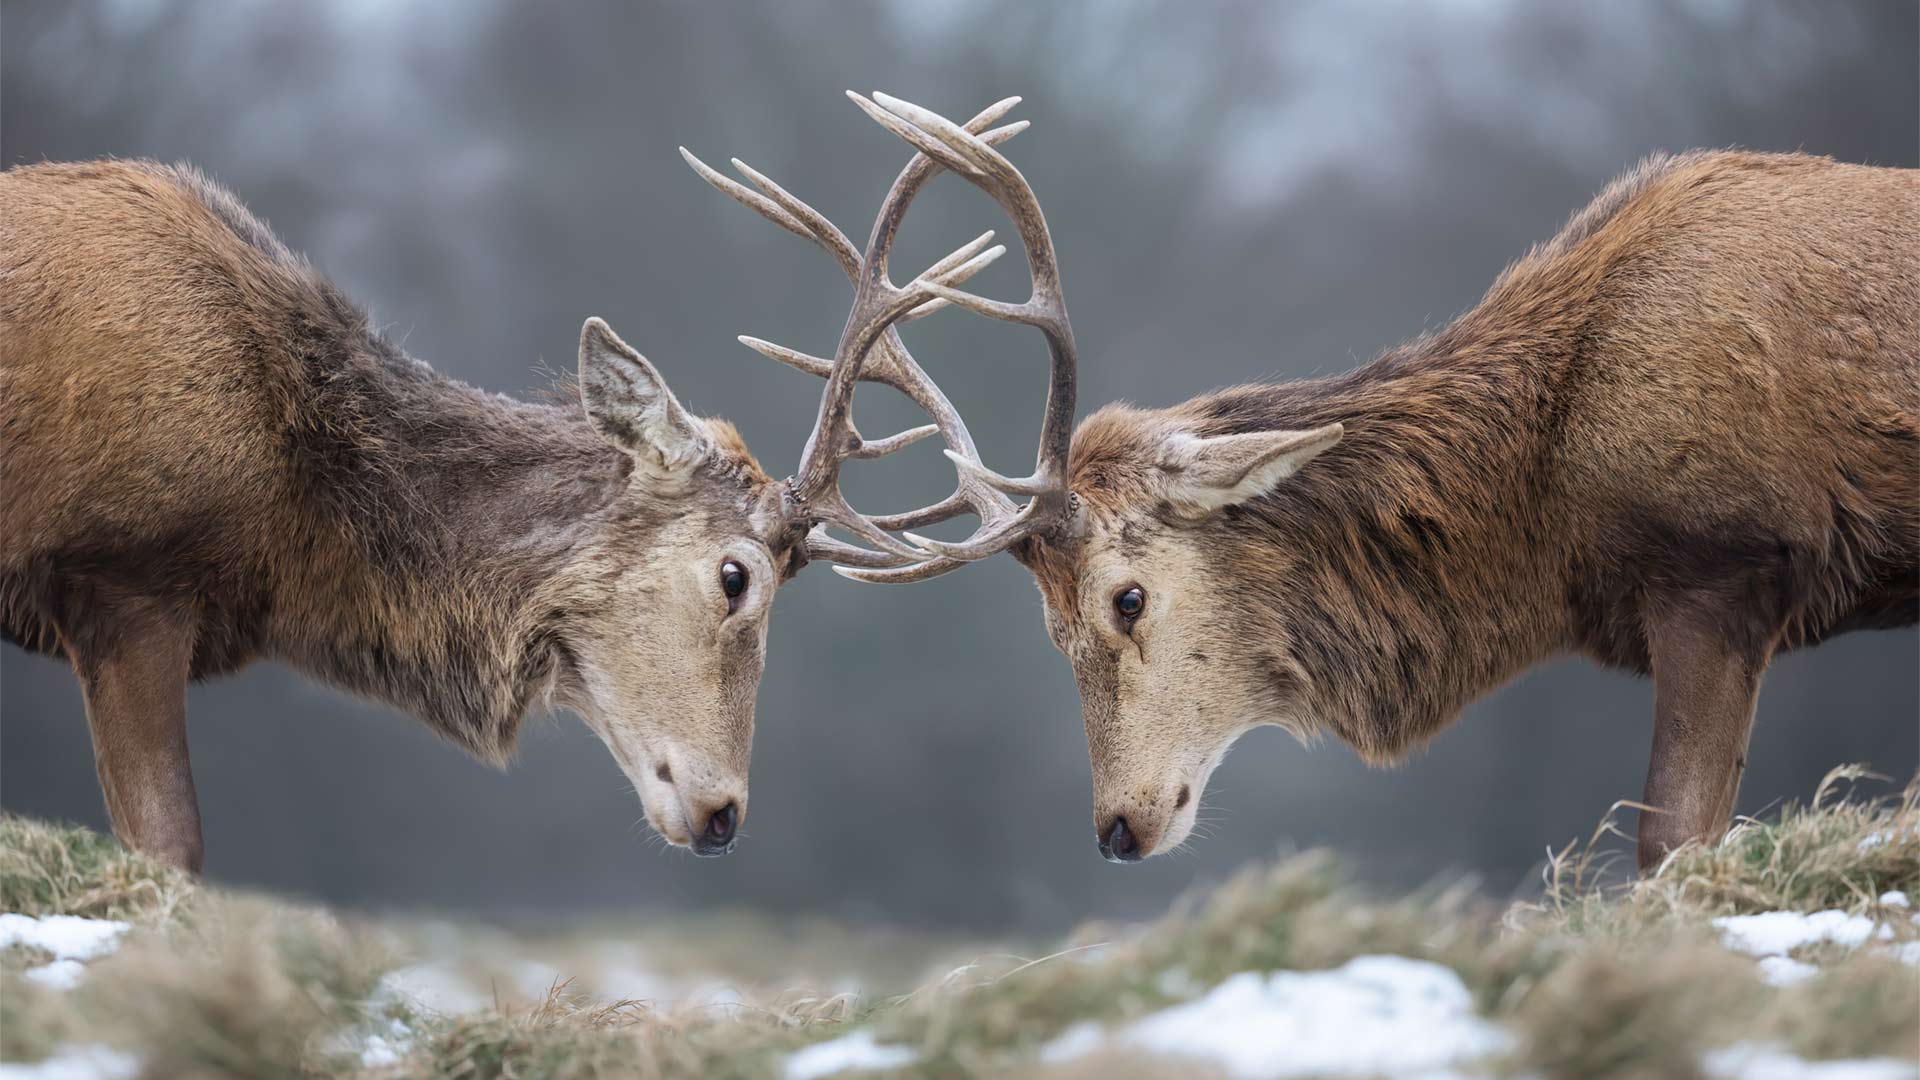 Two deer stags fighting in winter with antlers locked